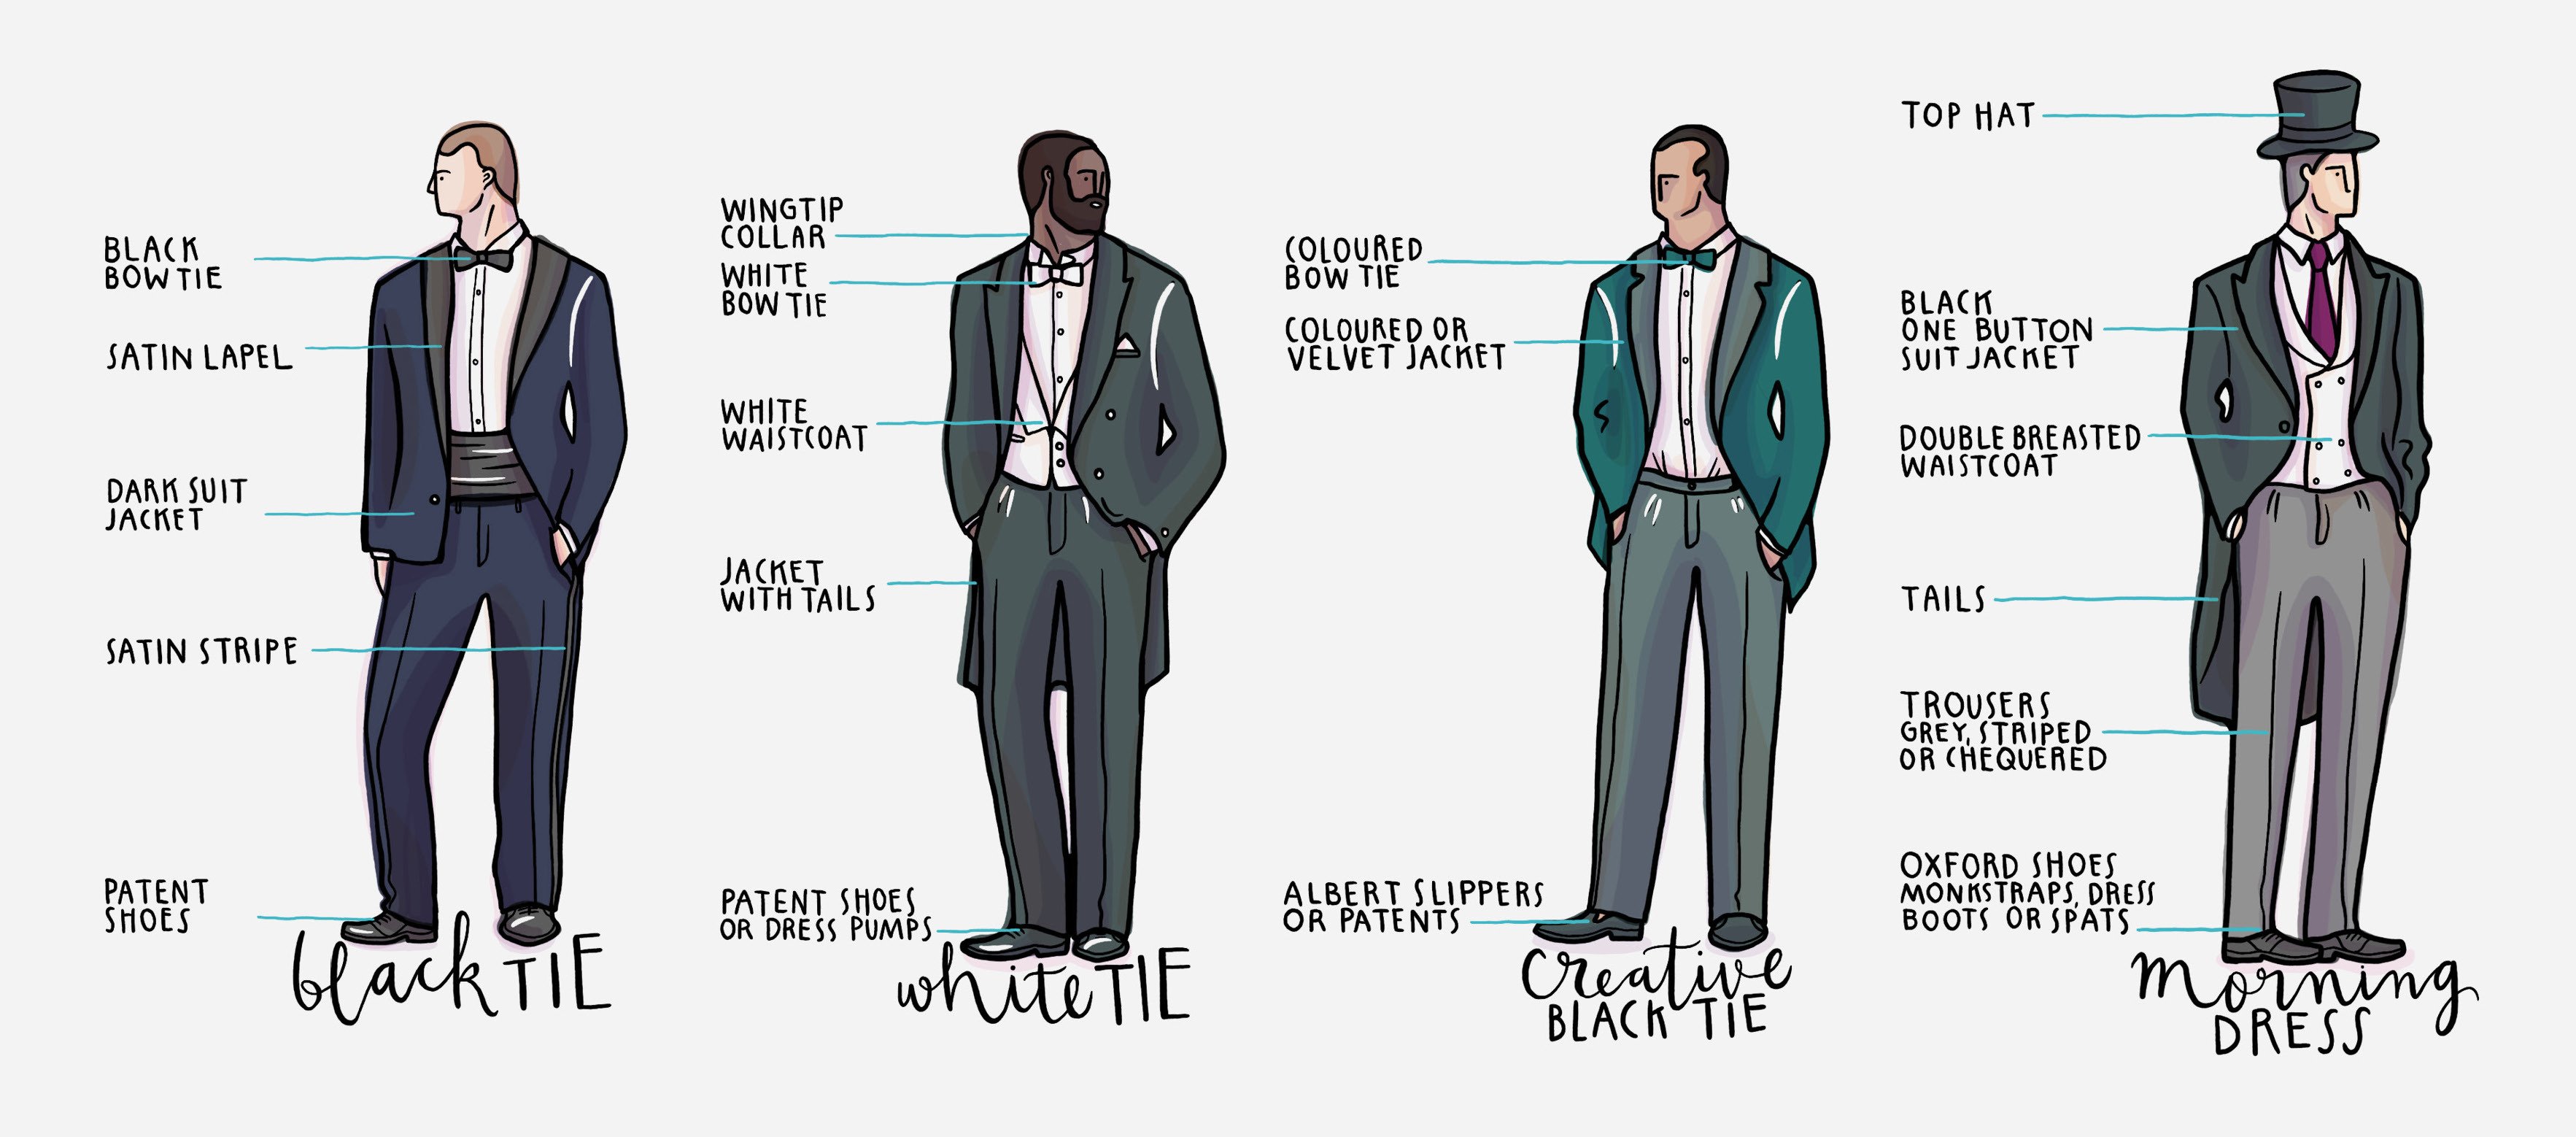 Suit up: Here's a basic style guide for men attending celebrity balls